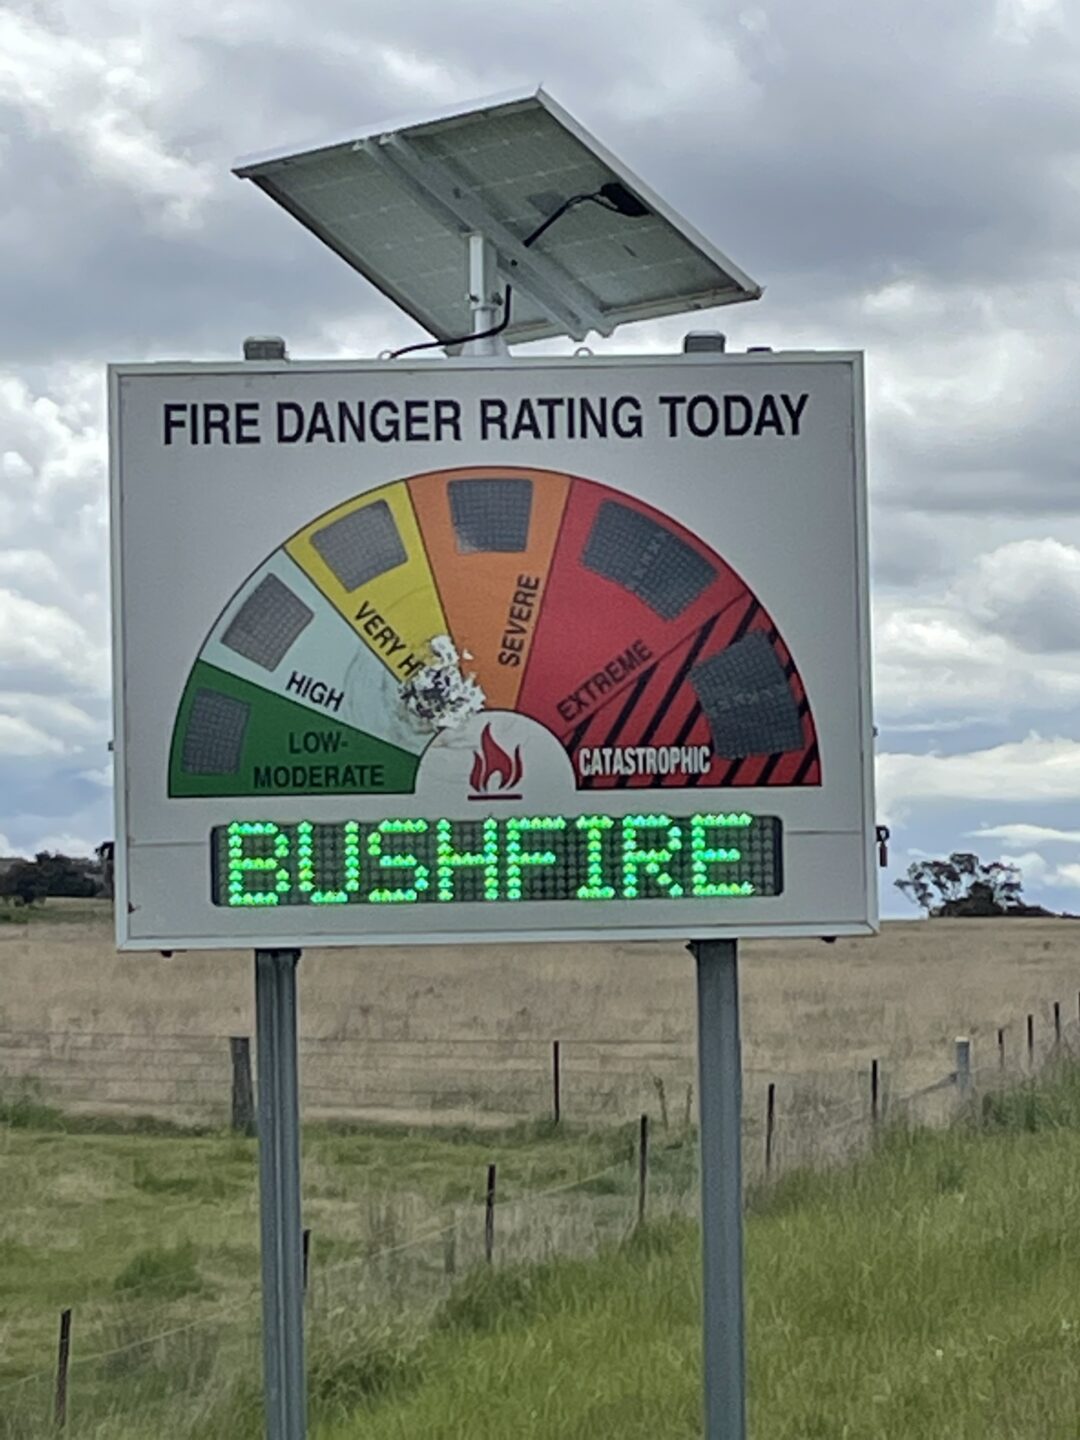 A bush fire safety rating sign that says 'BUSHFIRE' in green lights as the rating.